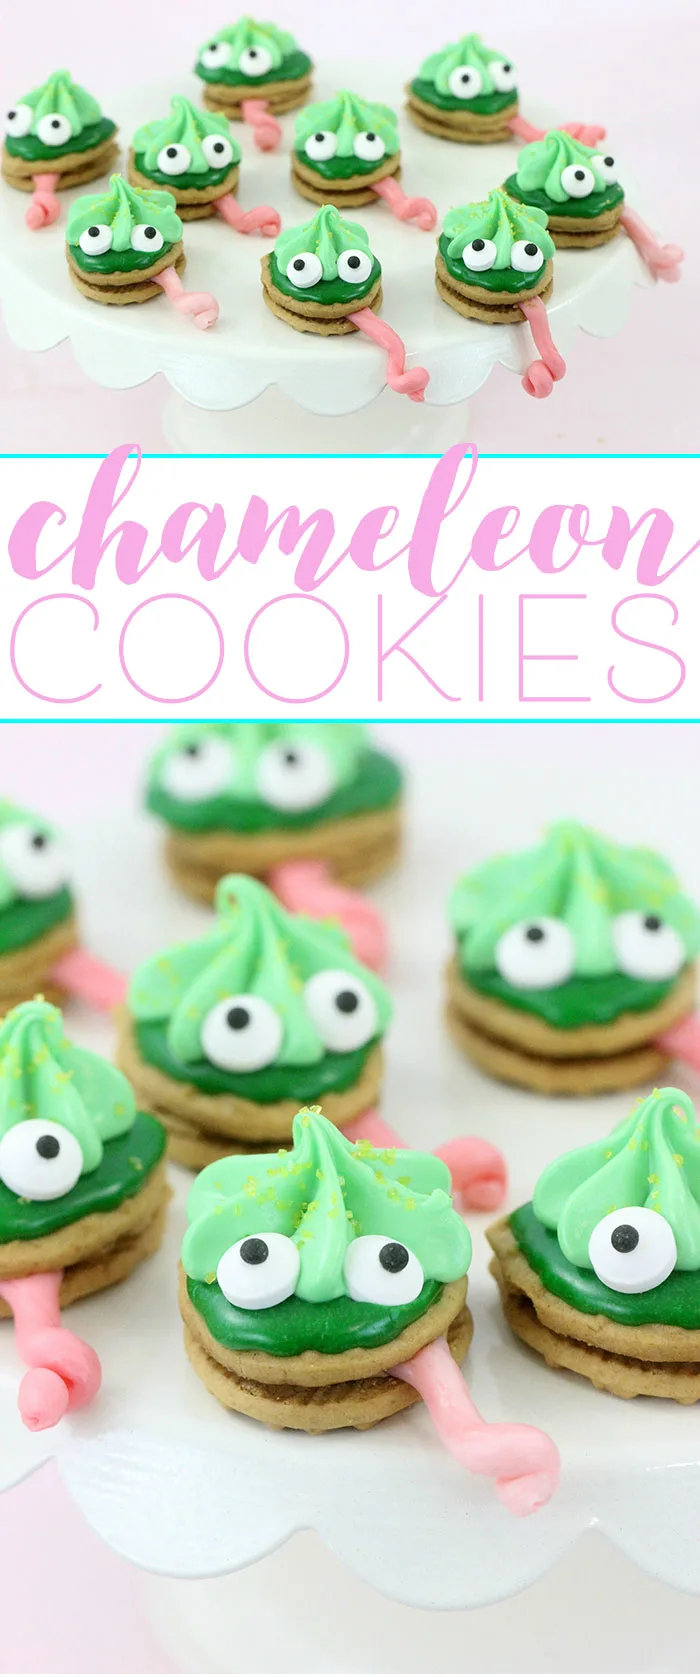 Chameleon cookies, perfect for themed parties! Easy to make with only a handful of easy to find ingredients.